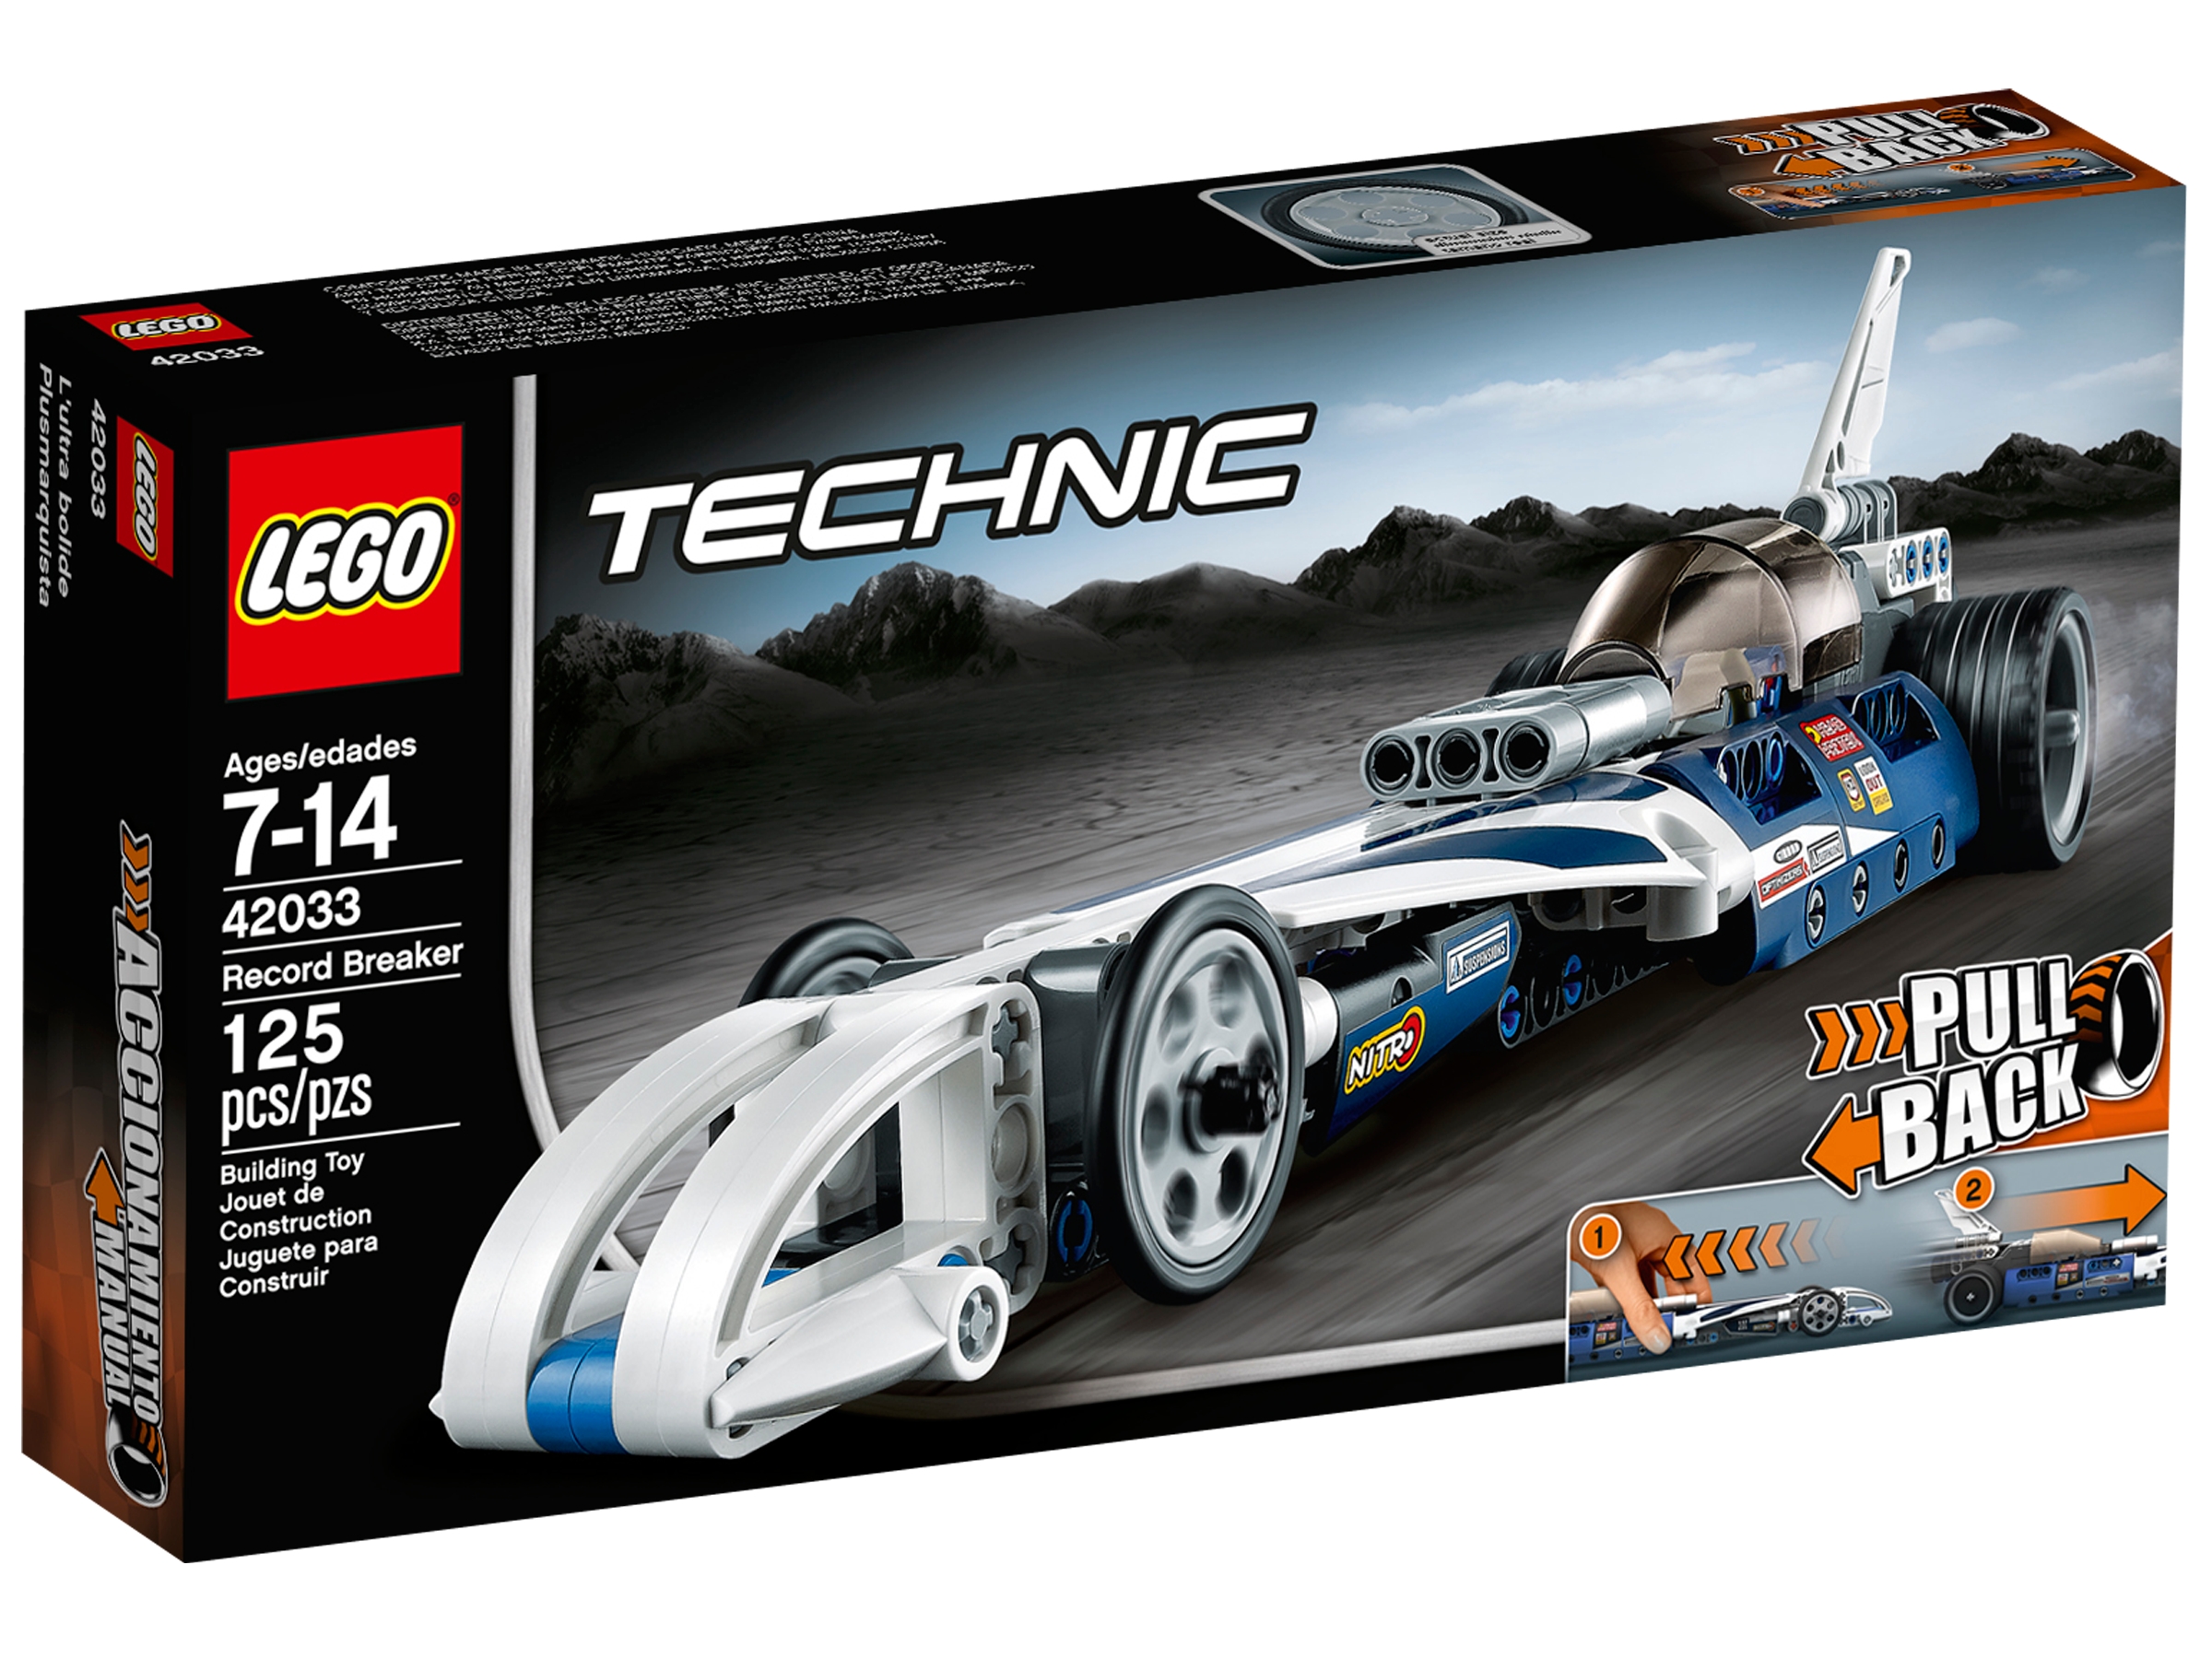 Record Breaker 42033 | Buy online at Official LEGO® Shop US